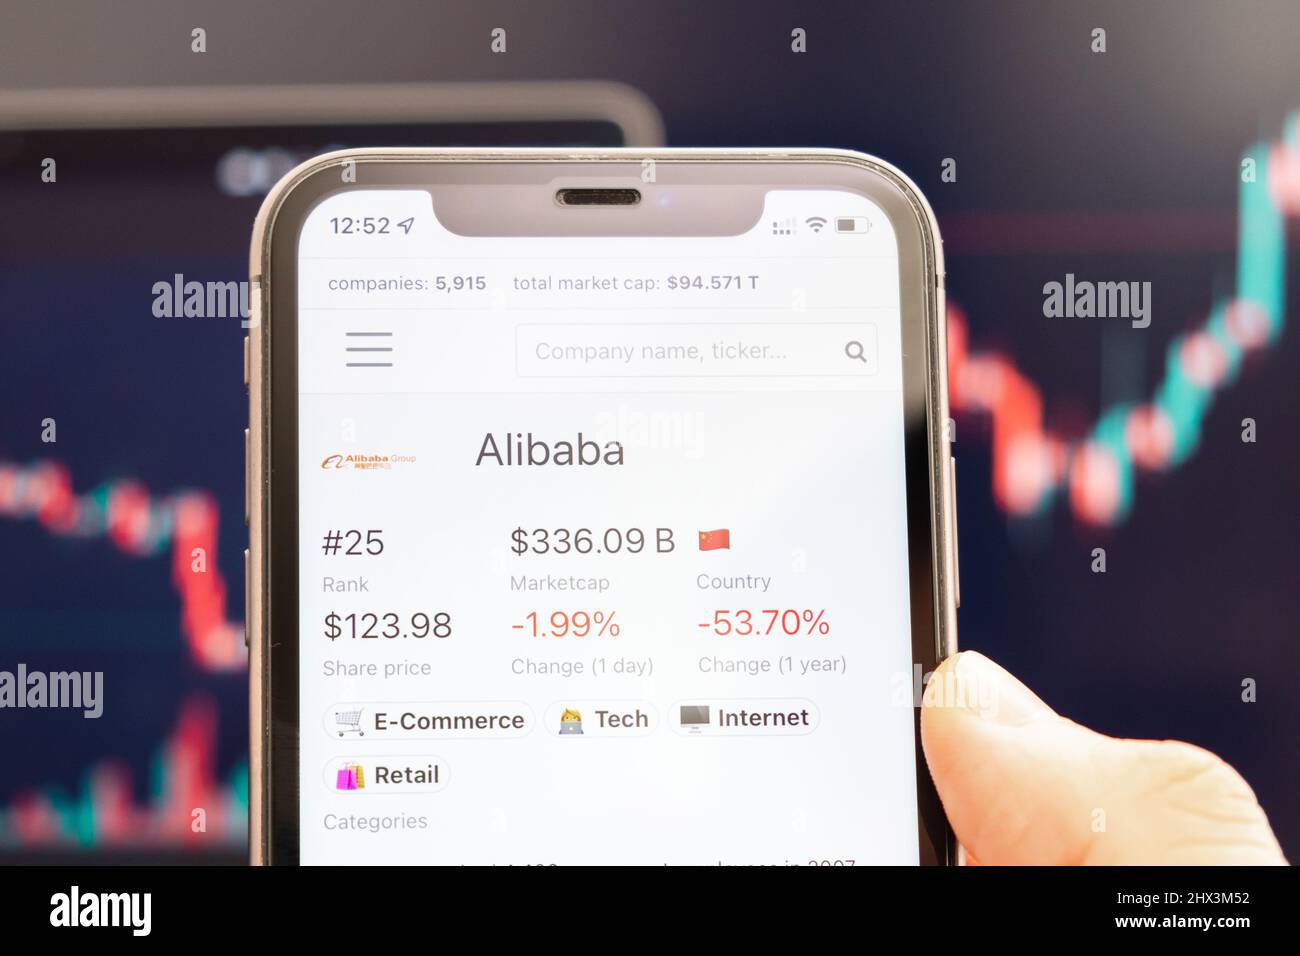 Alibaba stock price on the screen of mobile phone in mans hand with changing stock market graphs on the background, February 2022, San Francisco, USA. Stock Photo